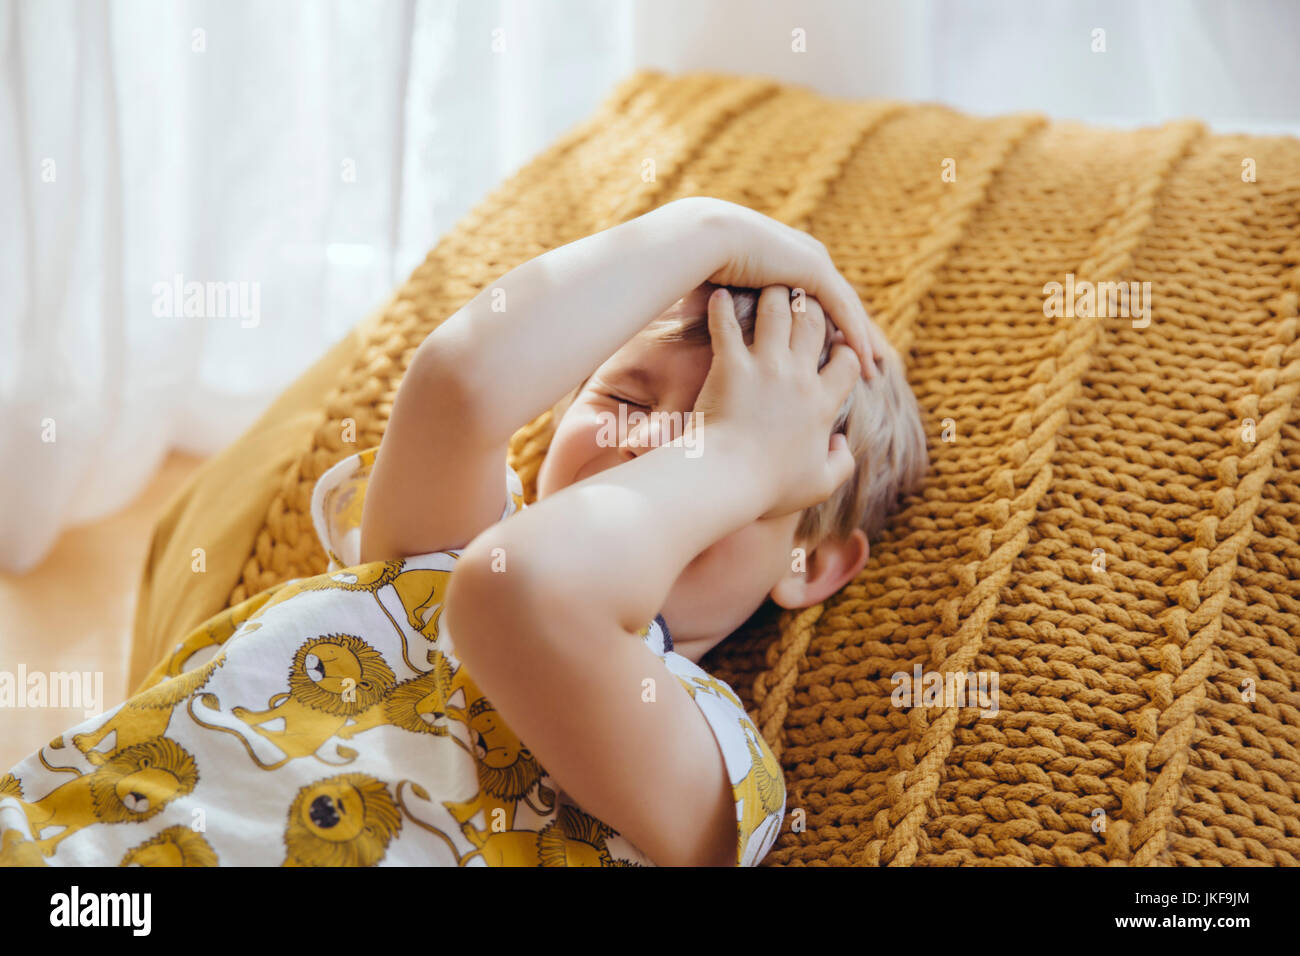 Little boy lying on cushion covering face with his hands Stock Photo